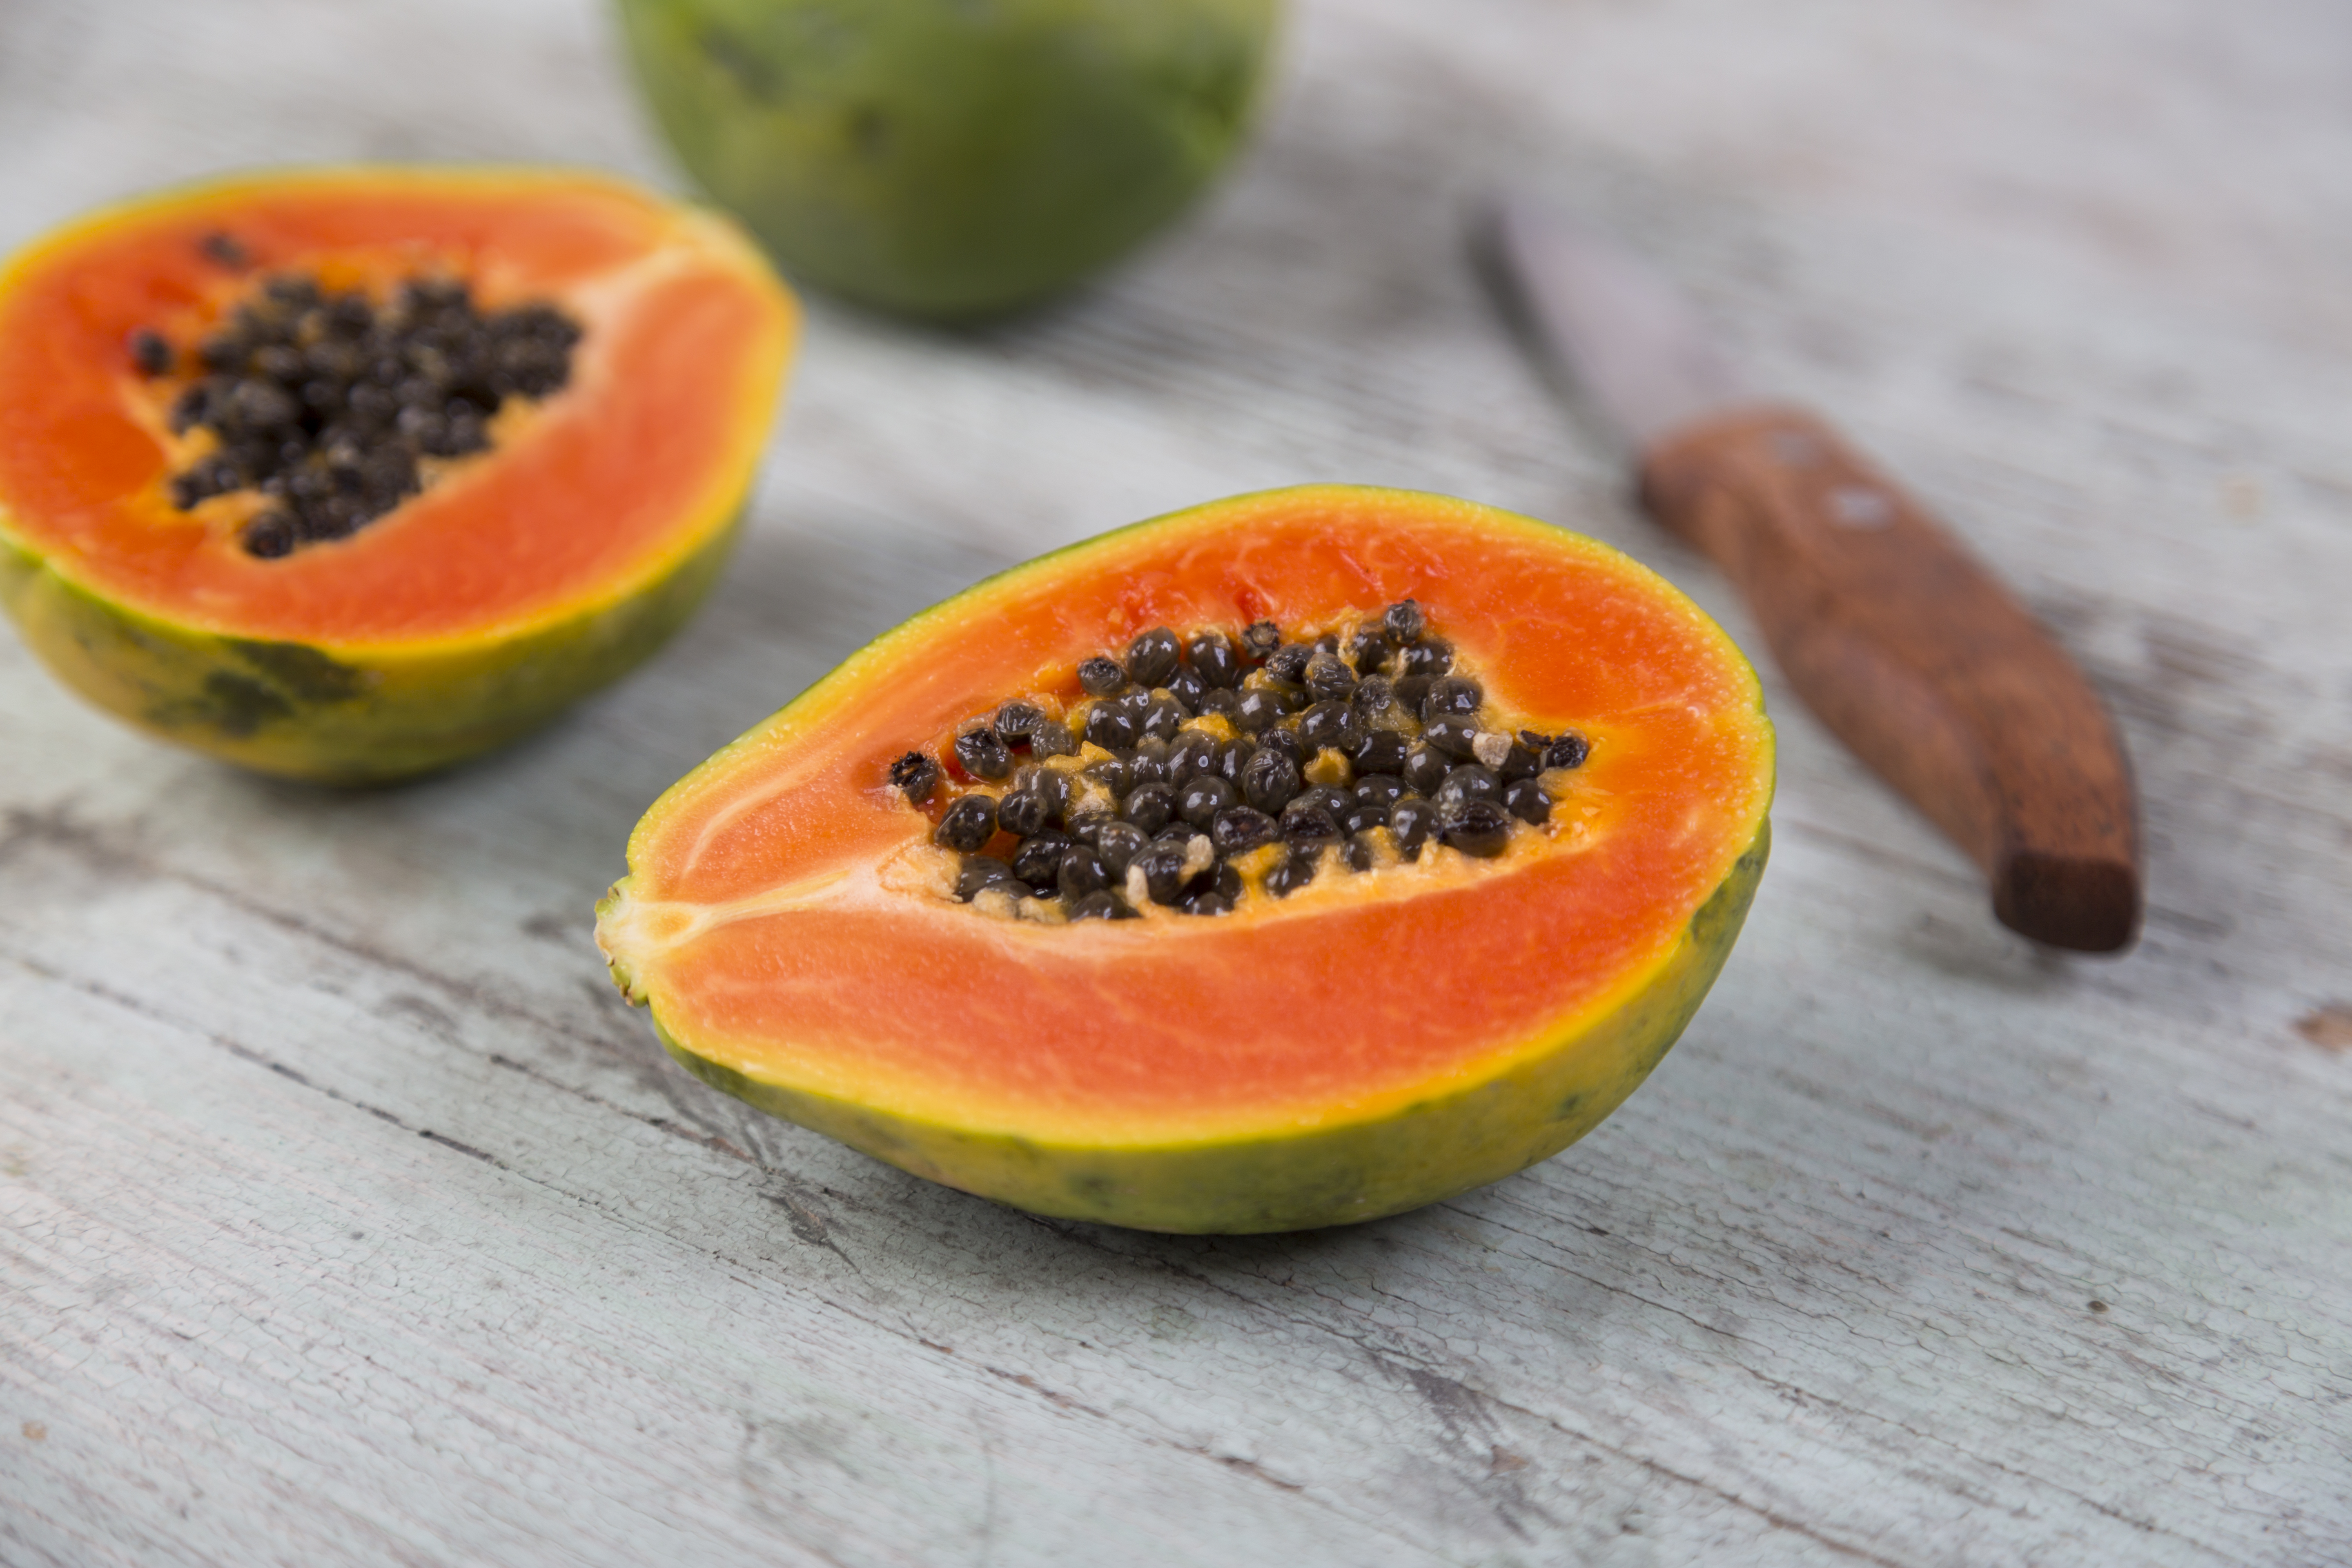 6. Maintains Youthful Skin: Papaya helps boost collagen production for healthy, vibrant skin